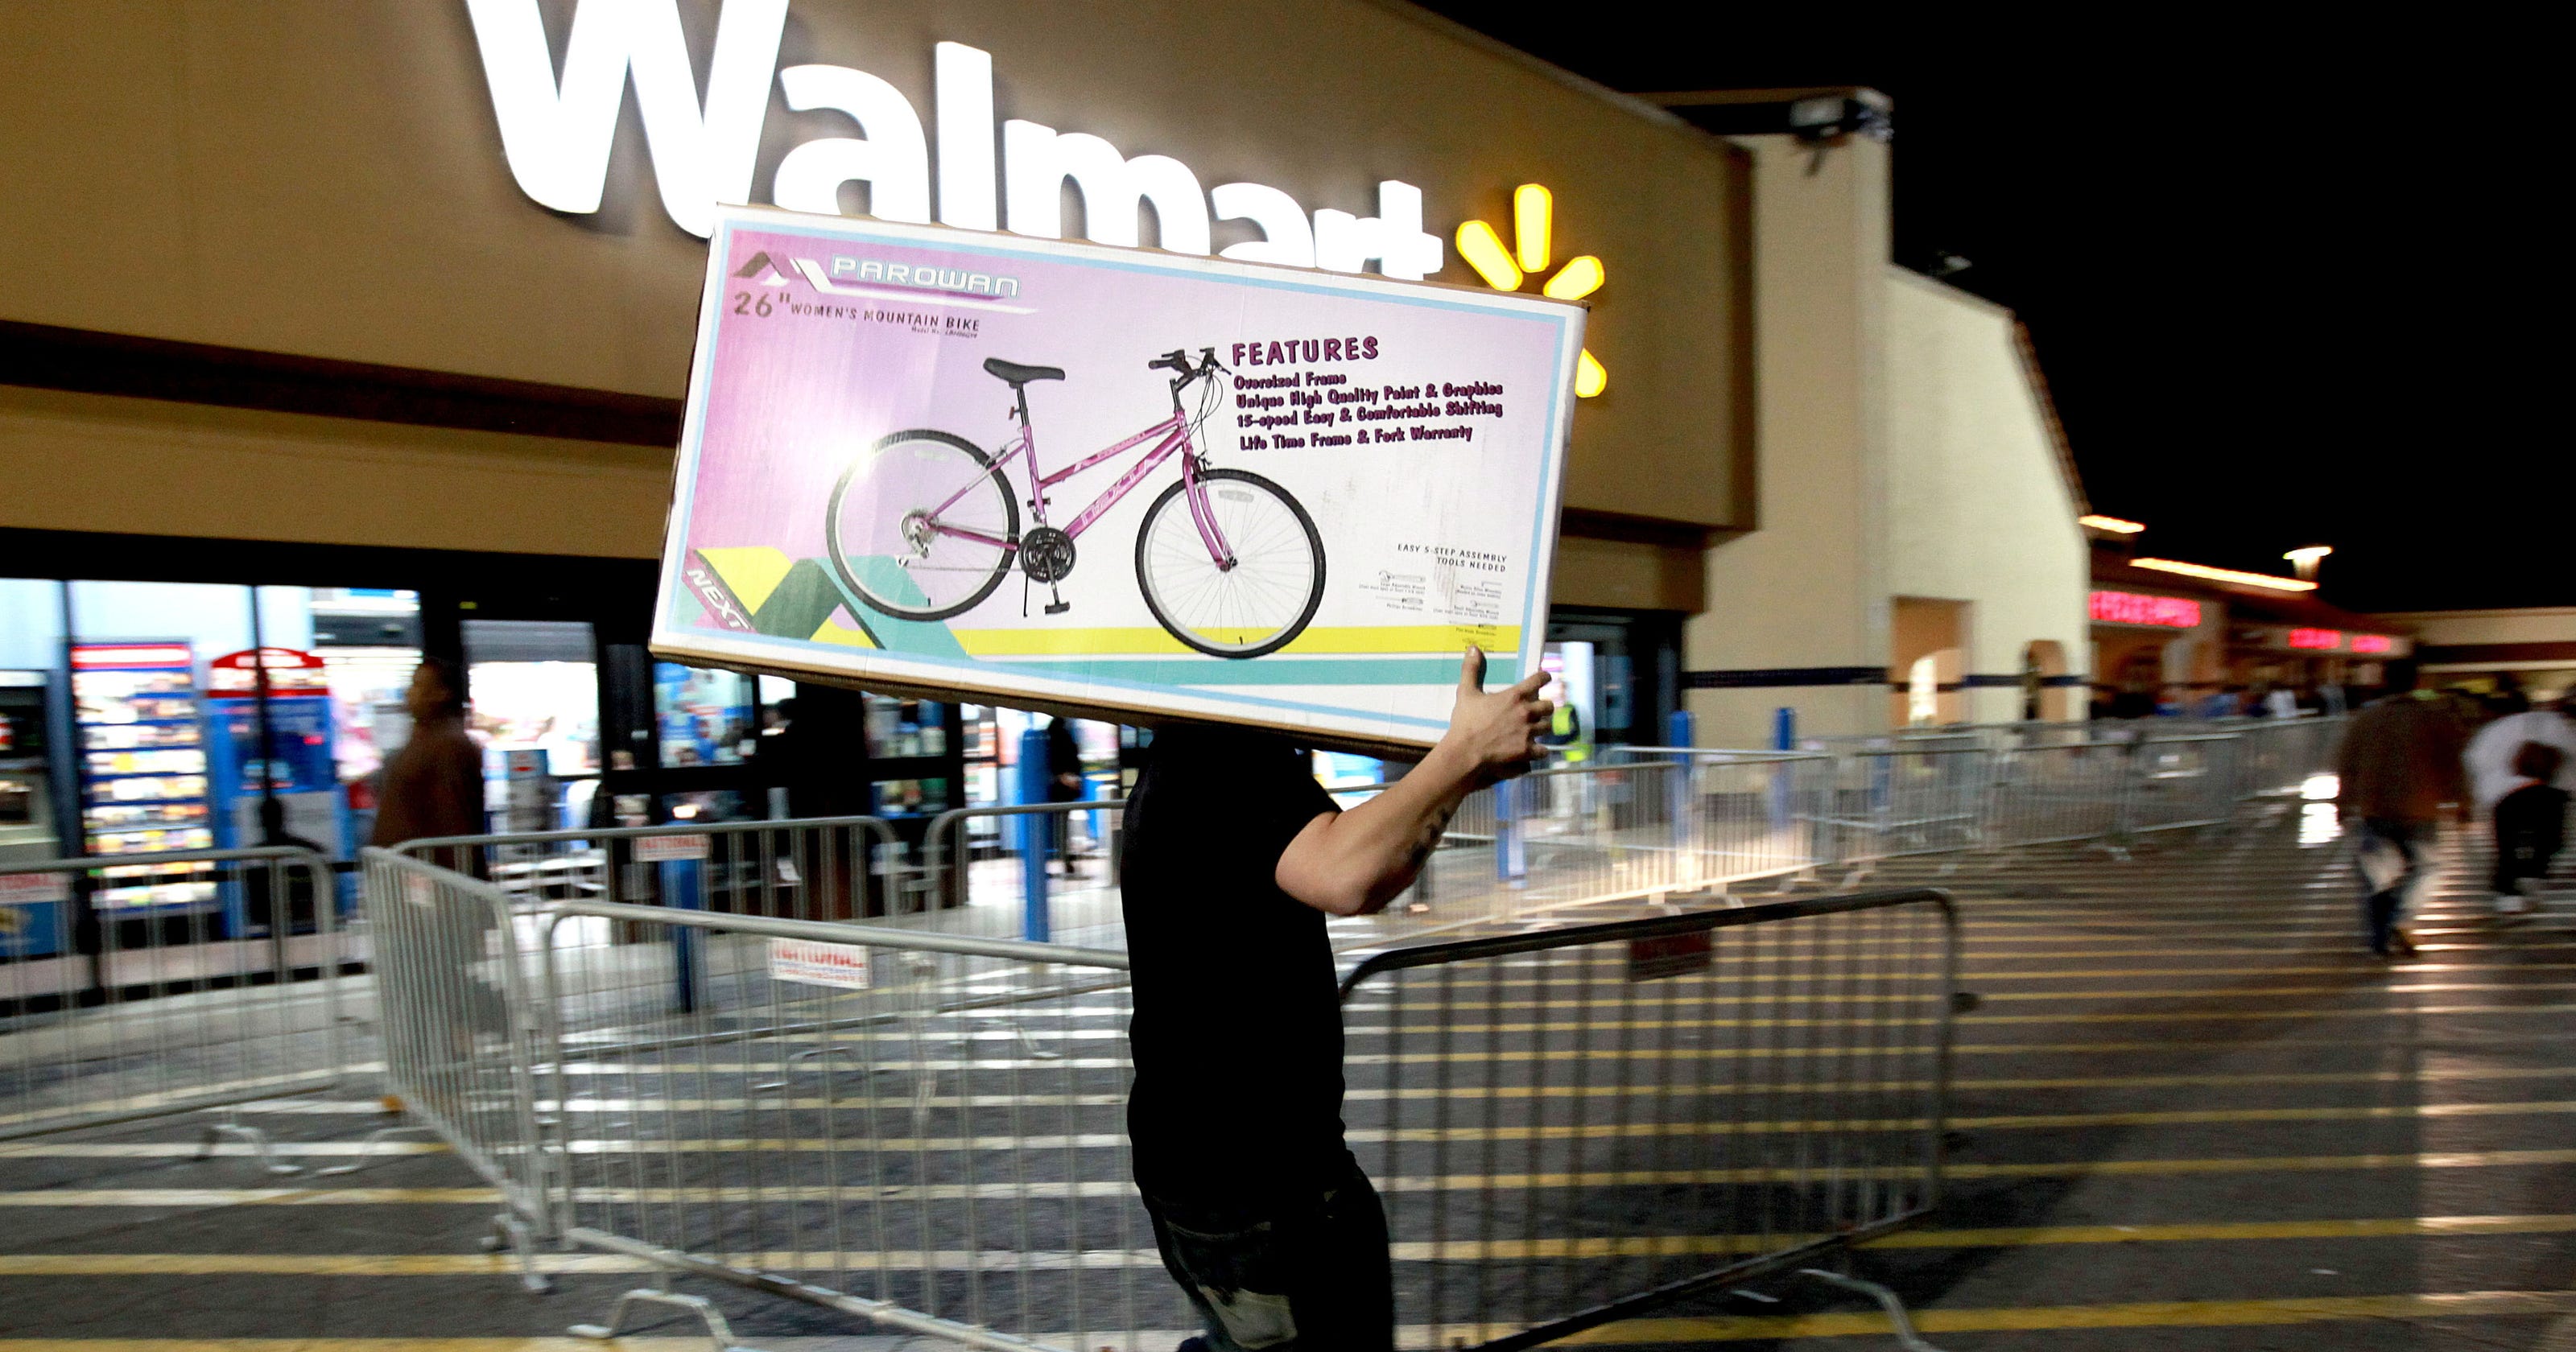 Walmart releases Black Friday promos early